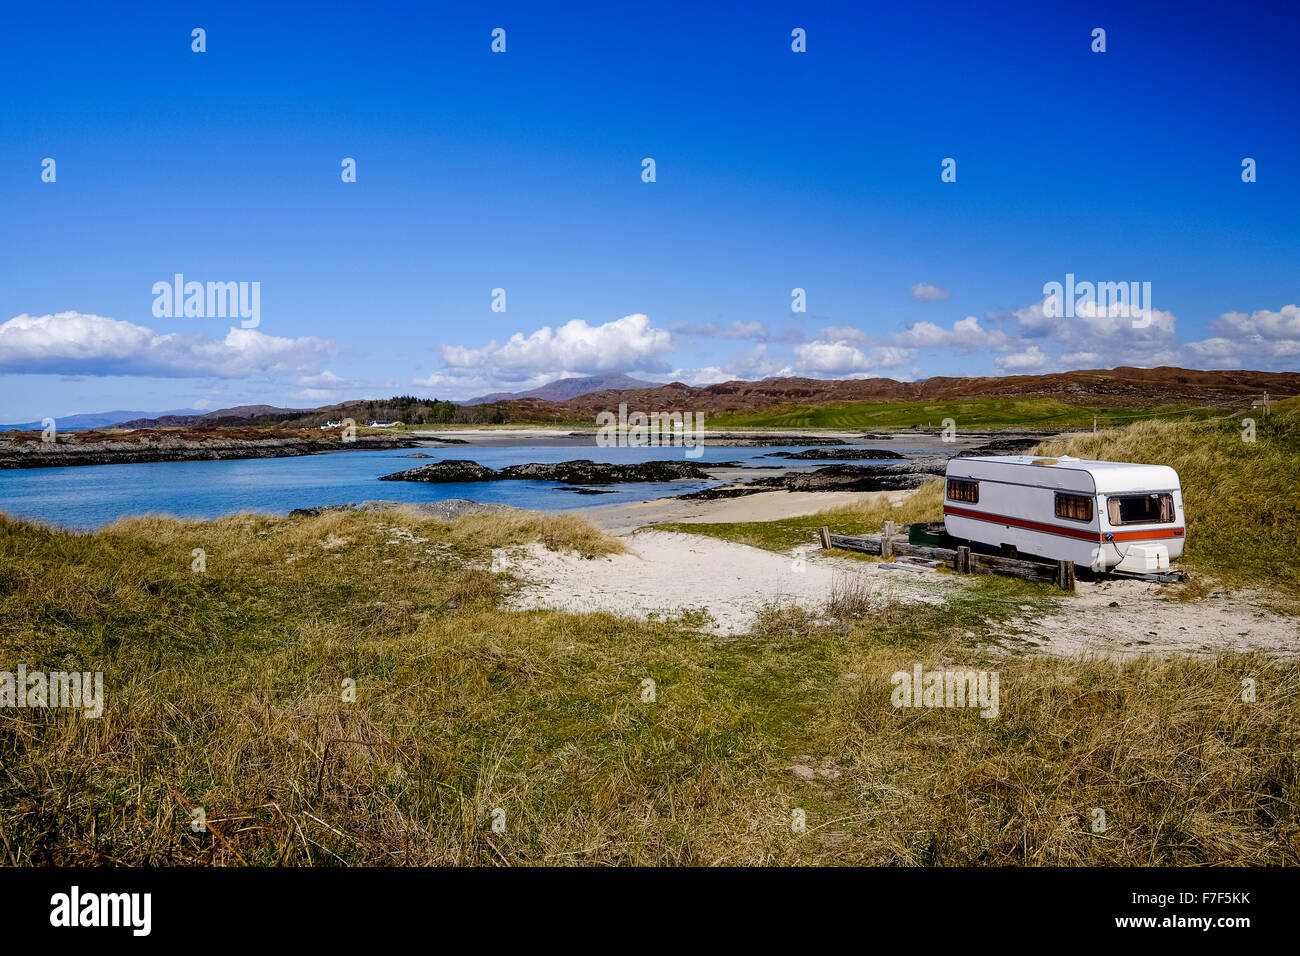 Caravan overlooking the coast in the Highlands close to Arisaig in Scotland Stock Photo